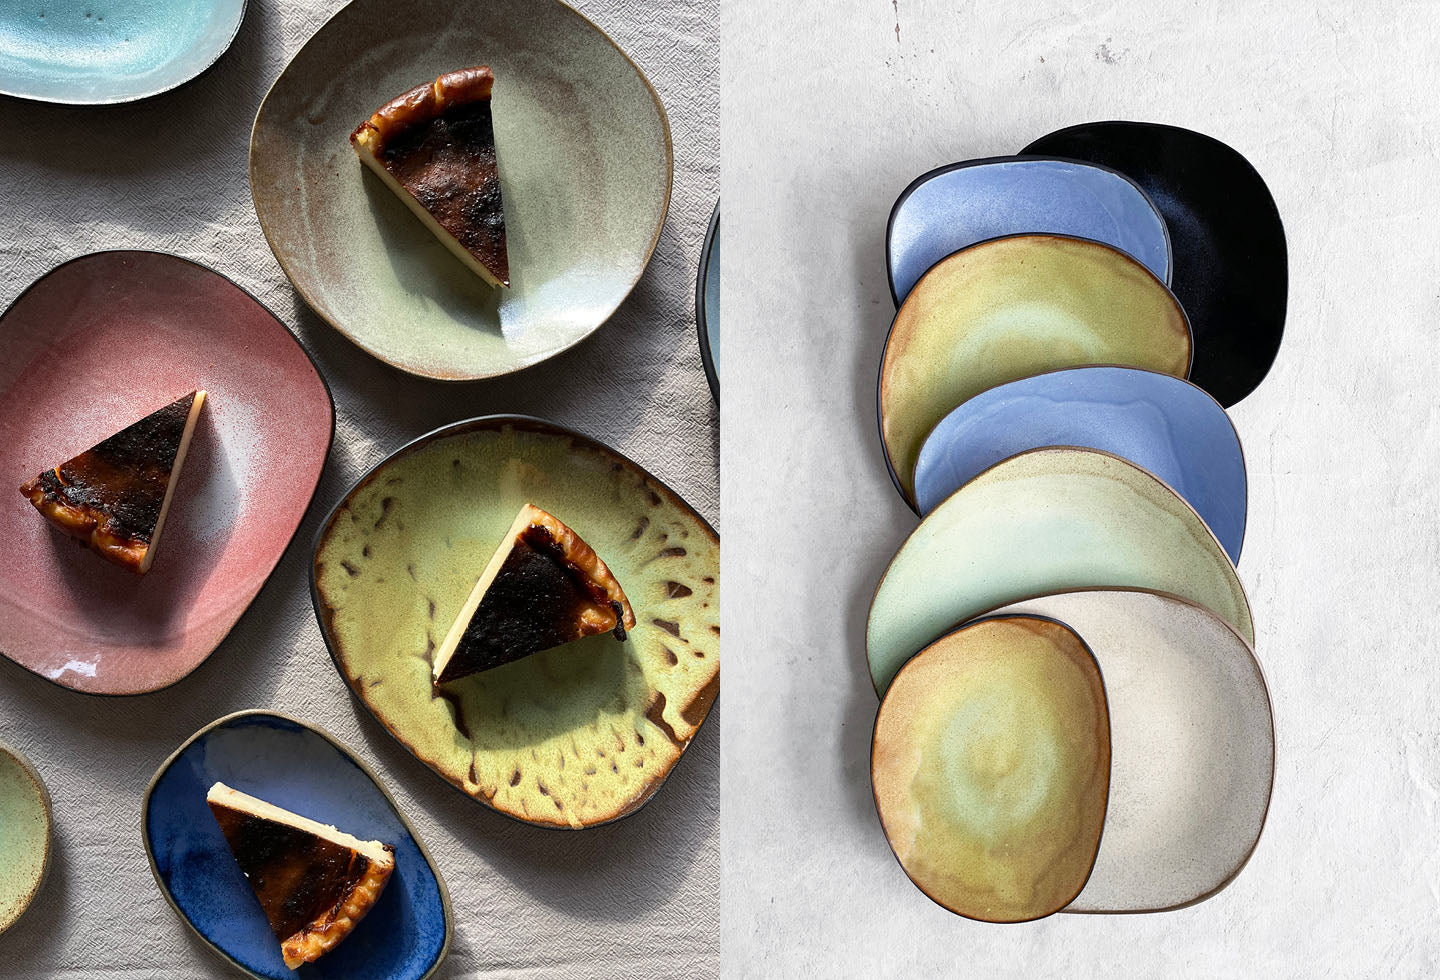 Colourful Hana Karim Studio ceramic handmade plates flat-lay with slices of cake and plates arrange in a colourful composition.